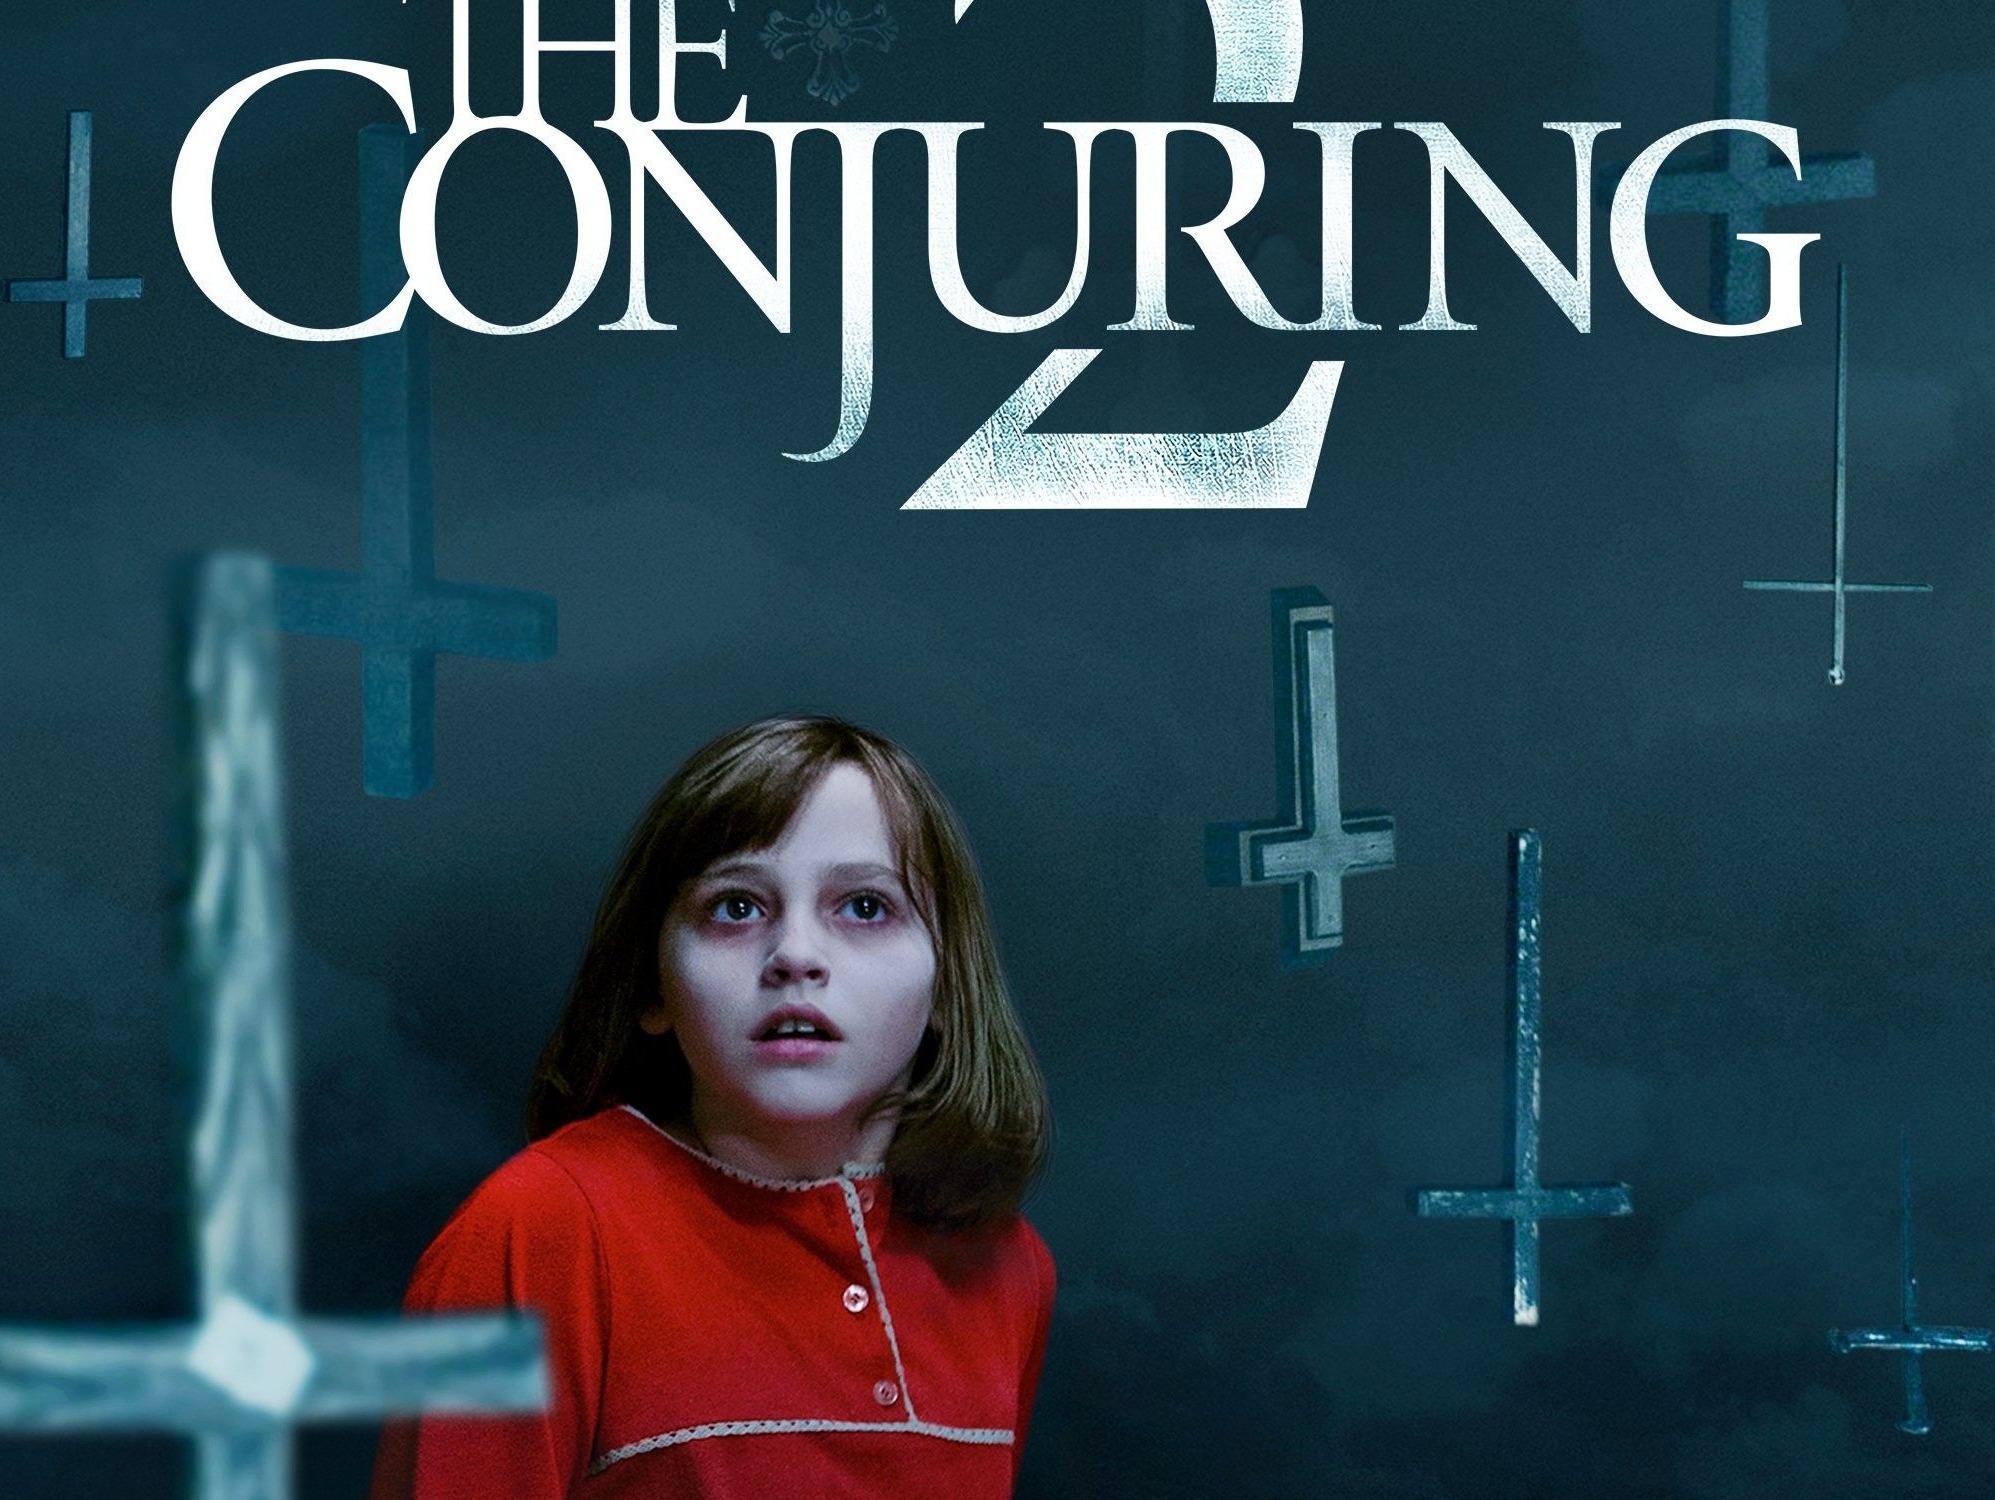 Conjuring перевод. Conjuring мод на майнкрафт. The Conjuring with Subtitles.